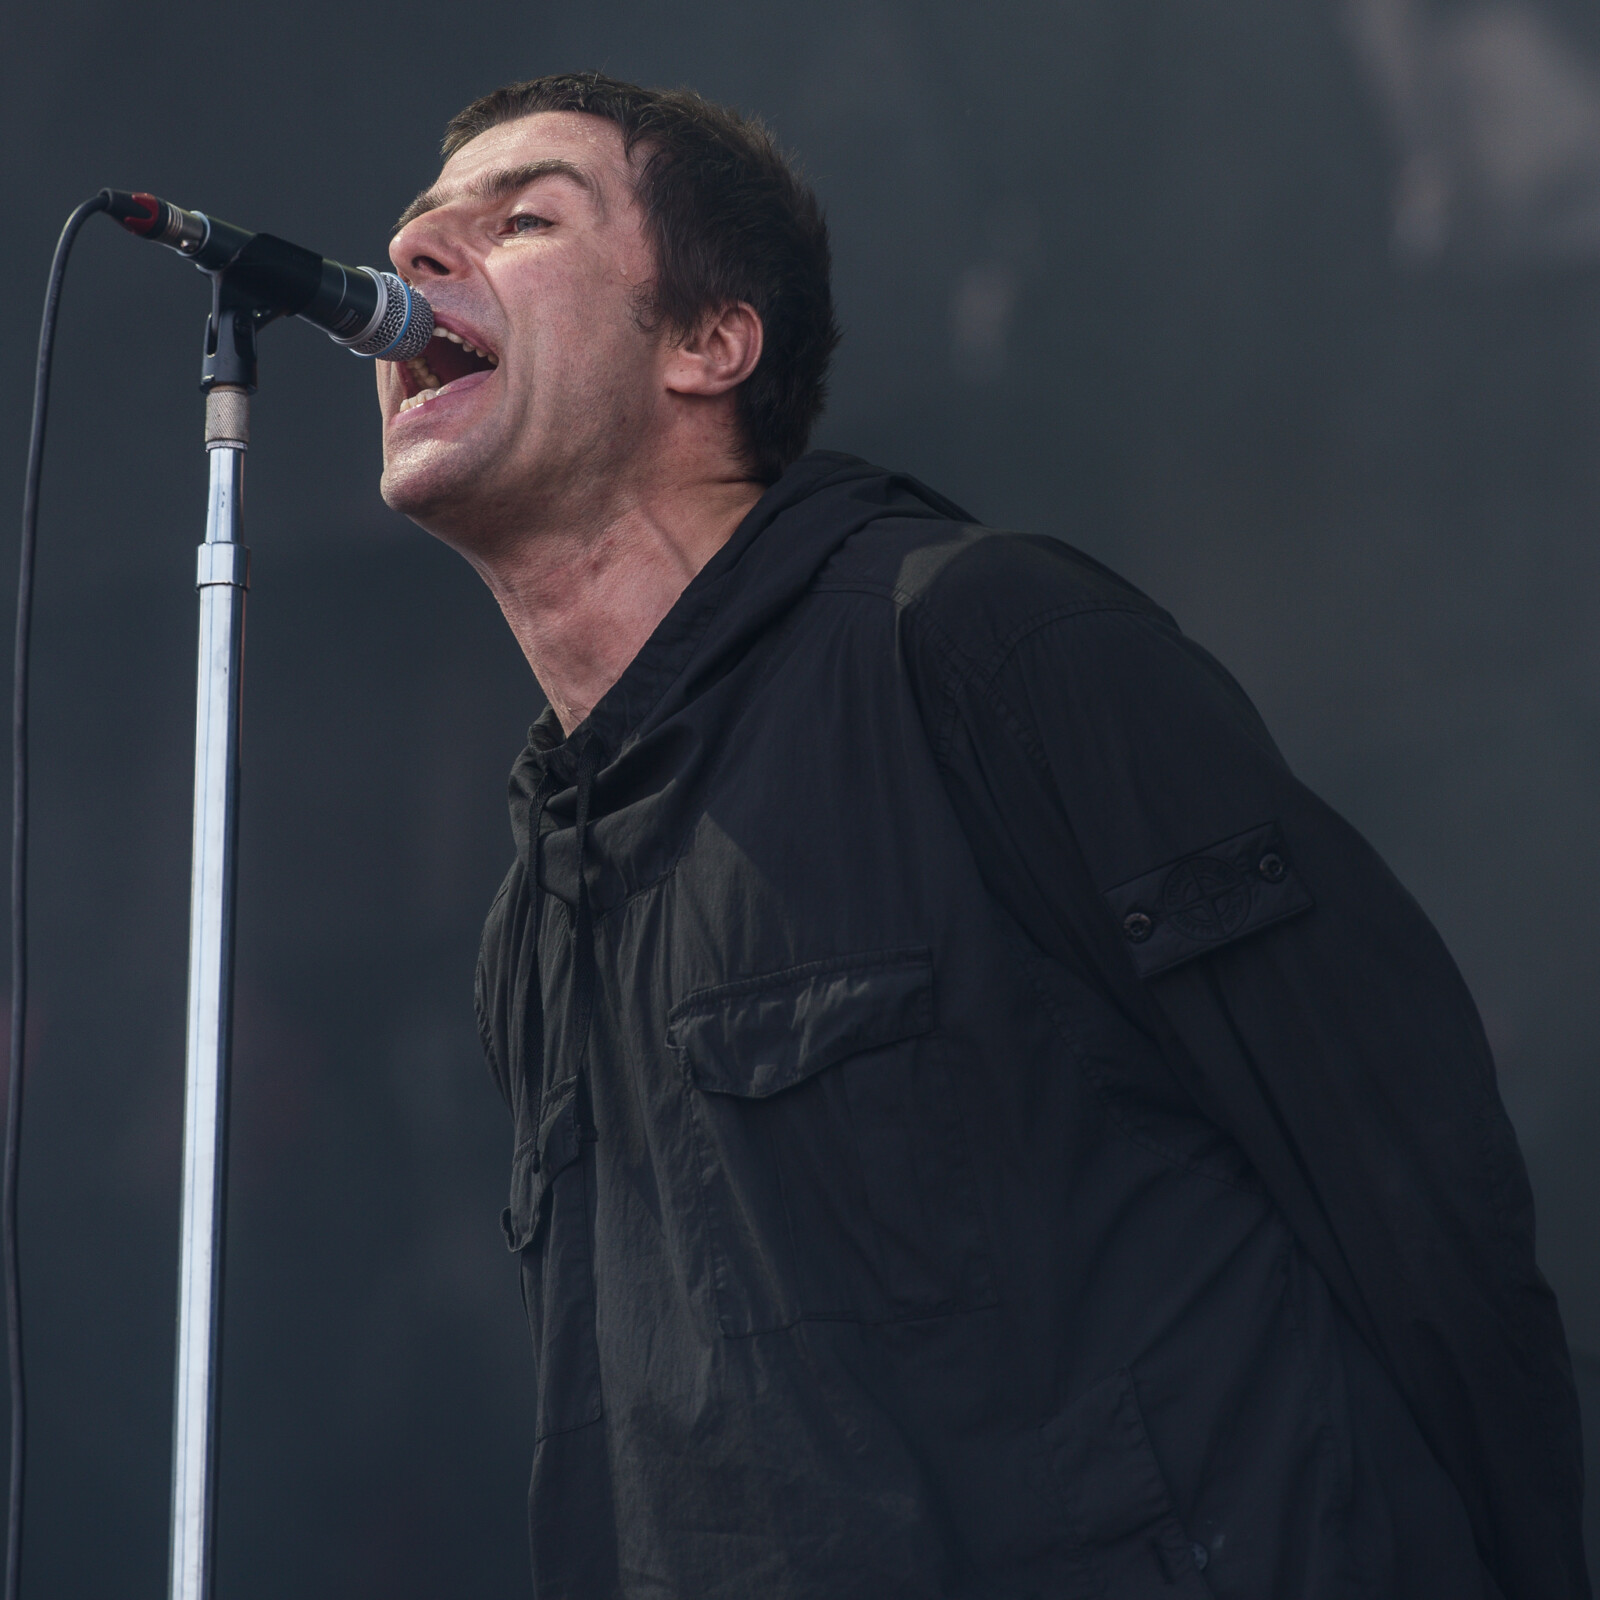 Liam Gallagher at Etihad Stadium Manchester &#8211; tickets, support, stage times and setlist, The Manc